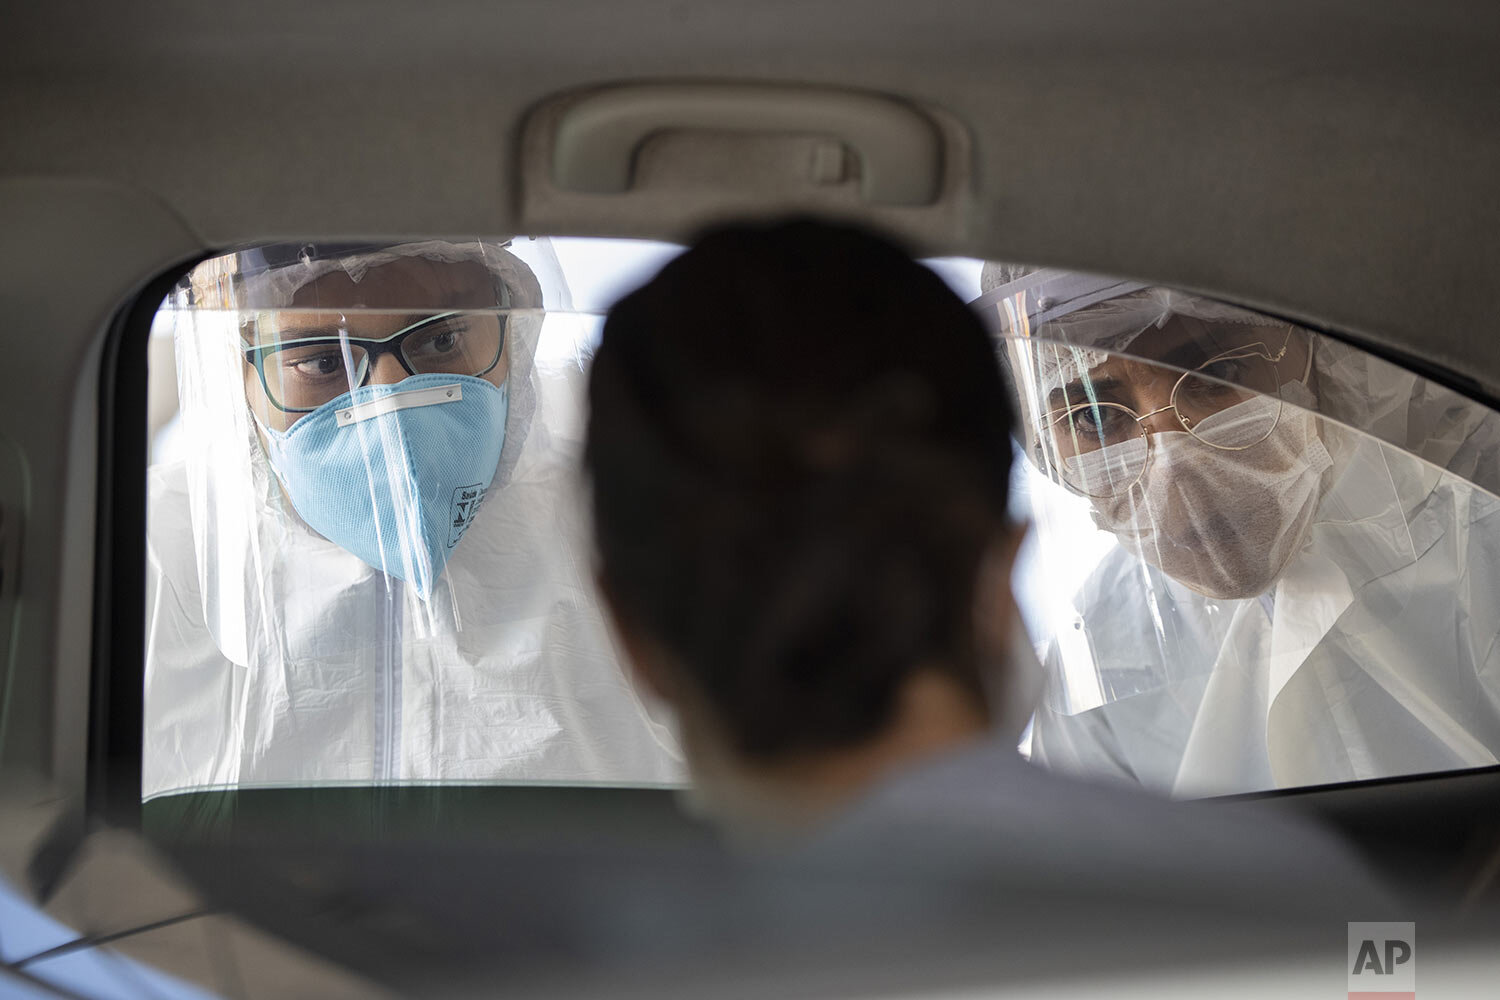  Medical workers in protective gear peer into a car to check if commuters have COVID-19 symptoms in Guarulhos on the outskirts of Sao Paulo, Brazil, Monday, March 30, 2020. (AP Photo/Andre Penner) 